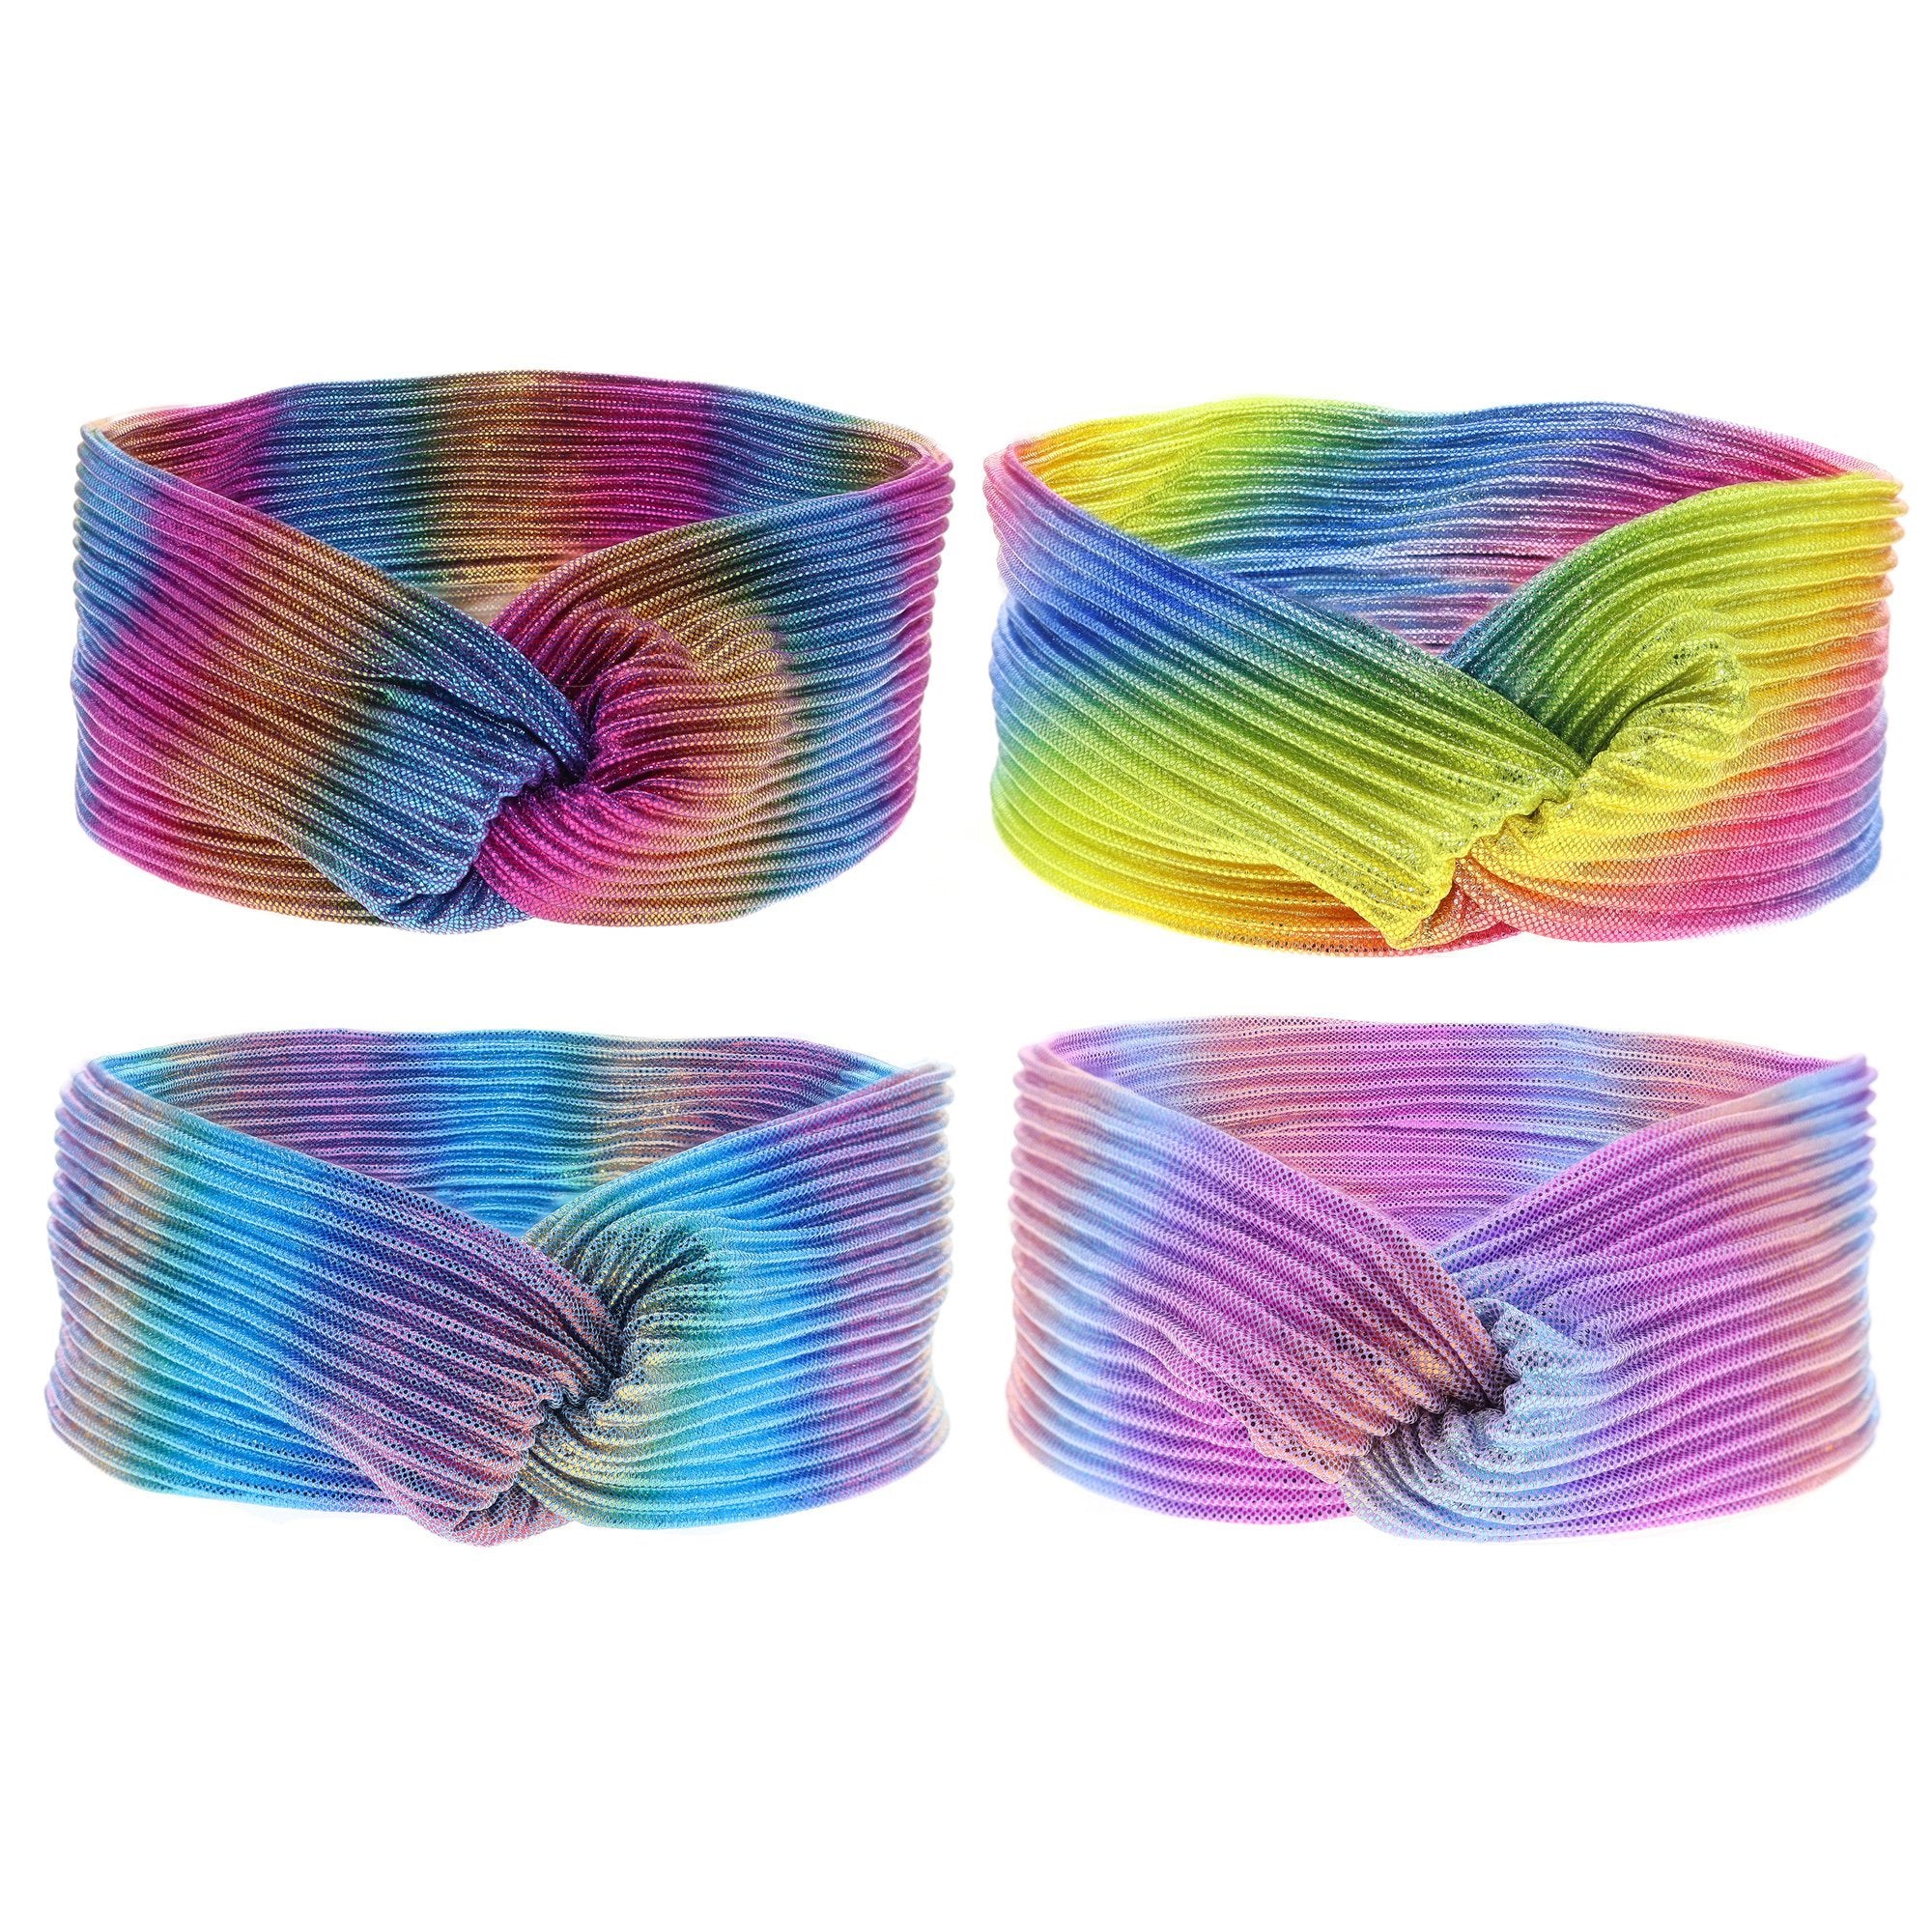 Wide Pleated Knot Headbands - Tie Dye 4 Pack - FROG SAC